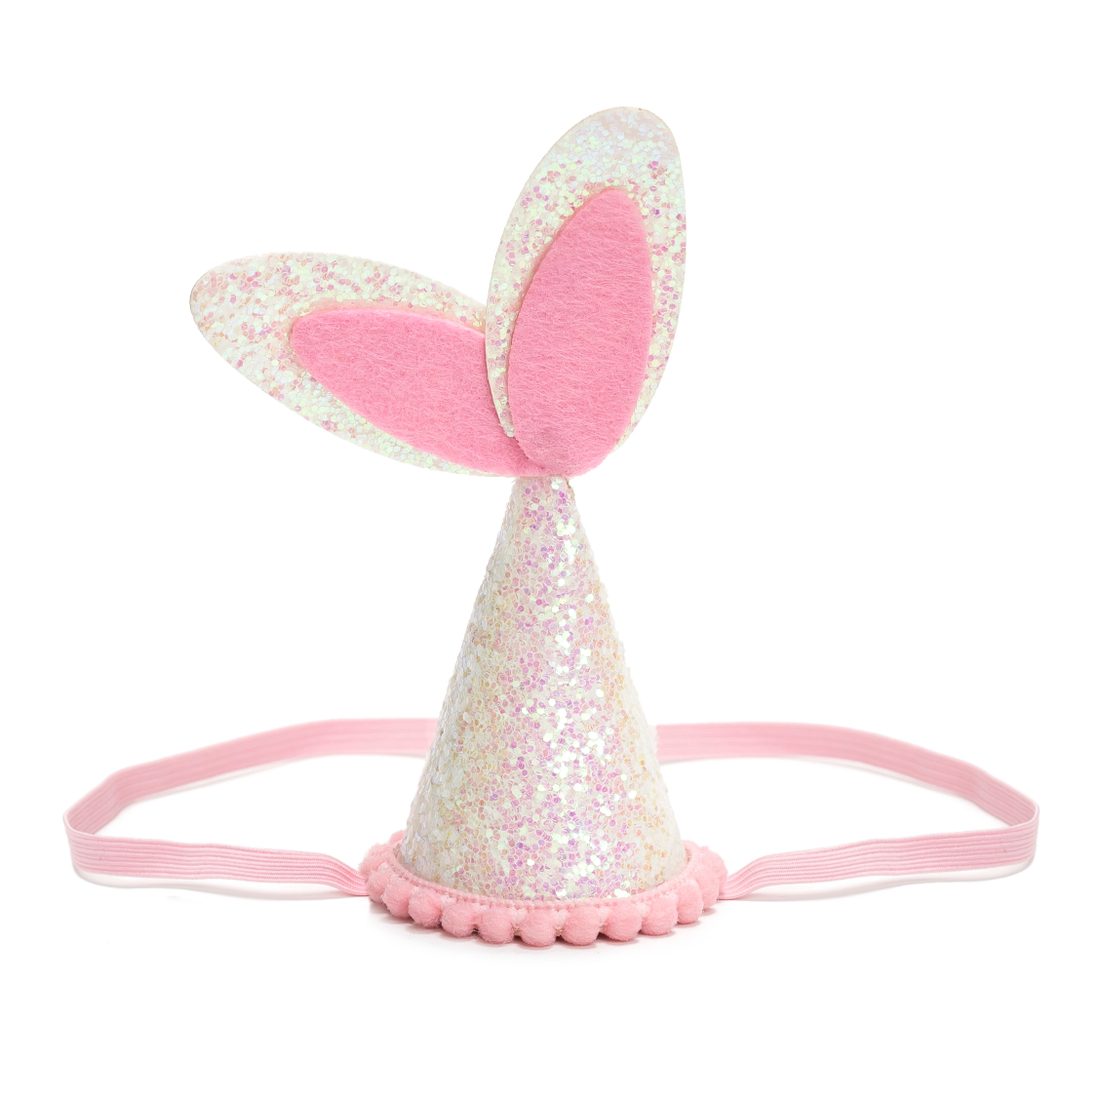 Party Crown Hat in Bunny - Organic Bunny